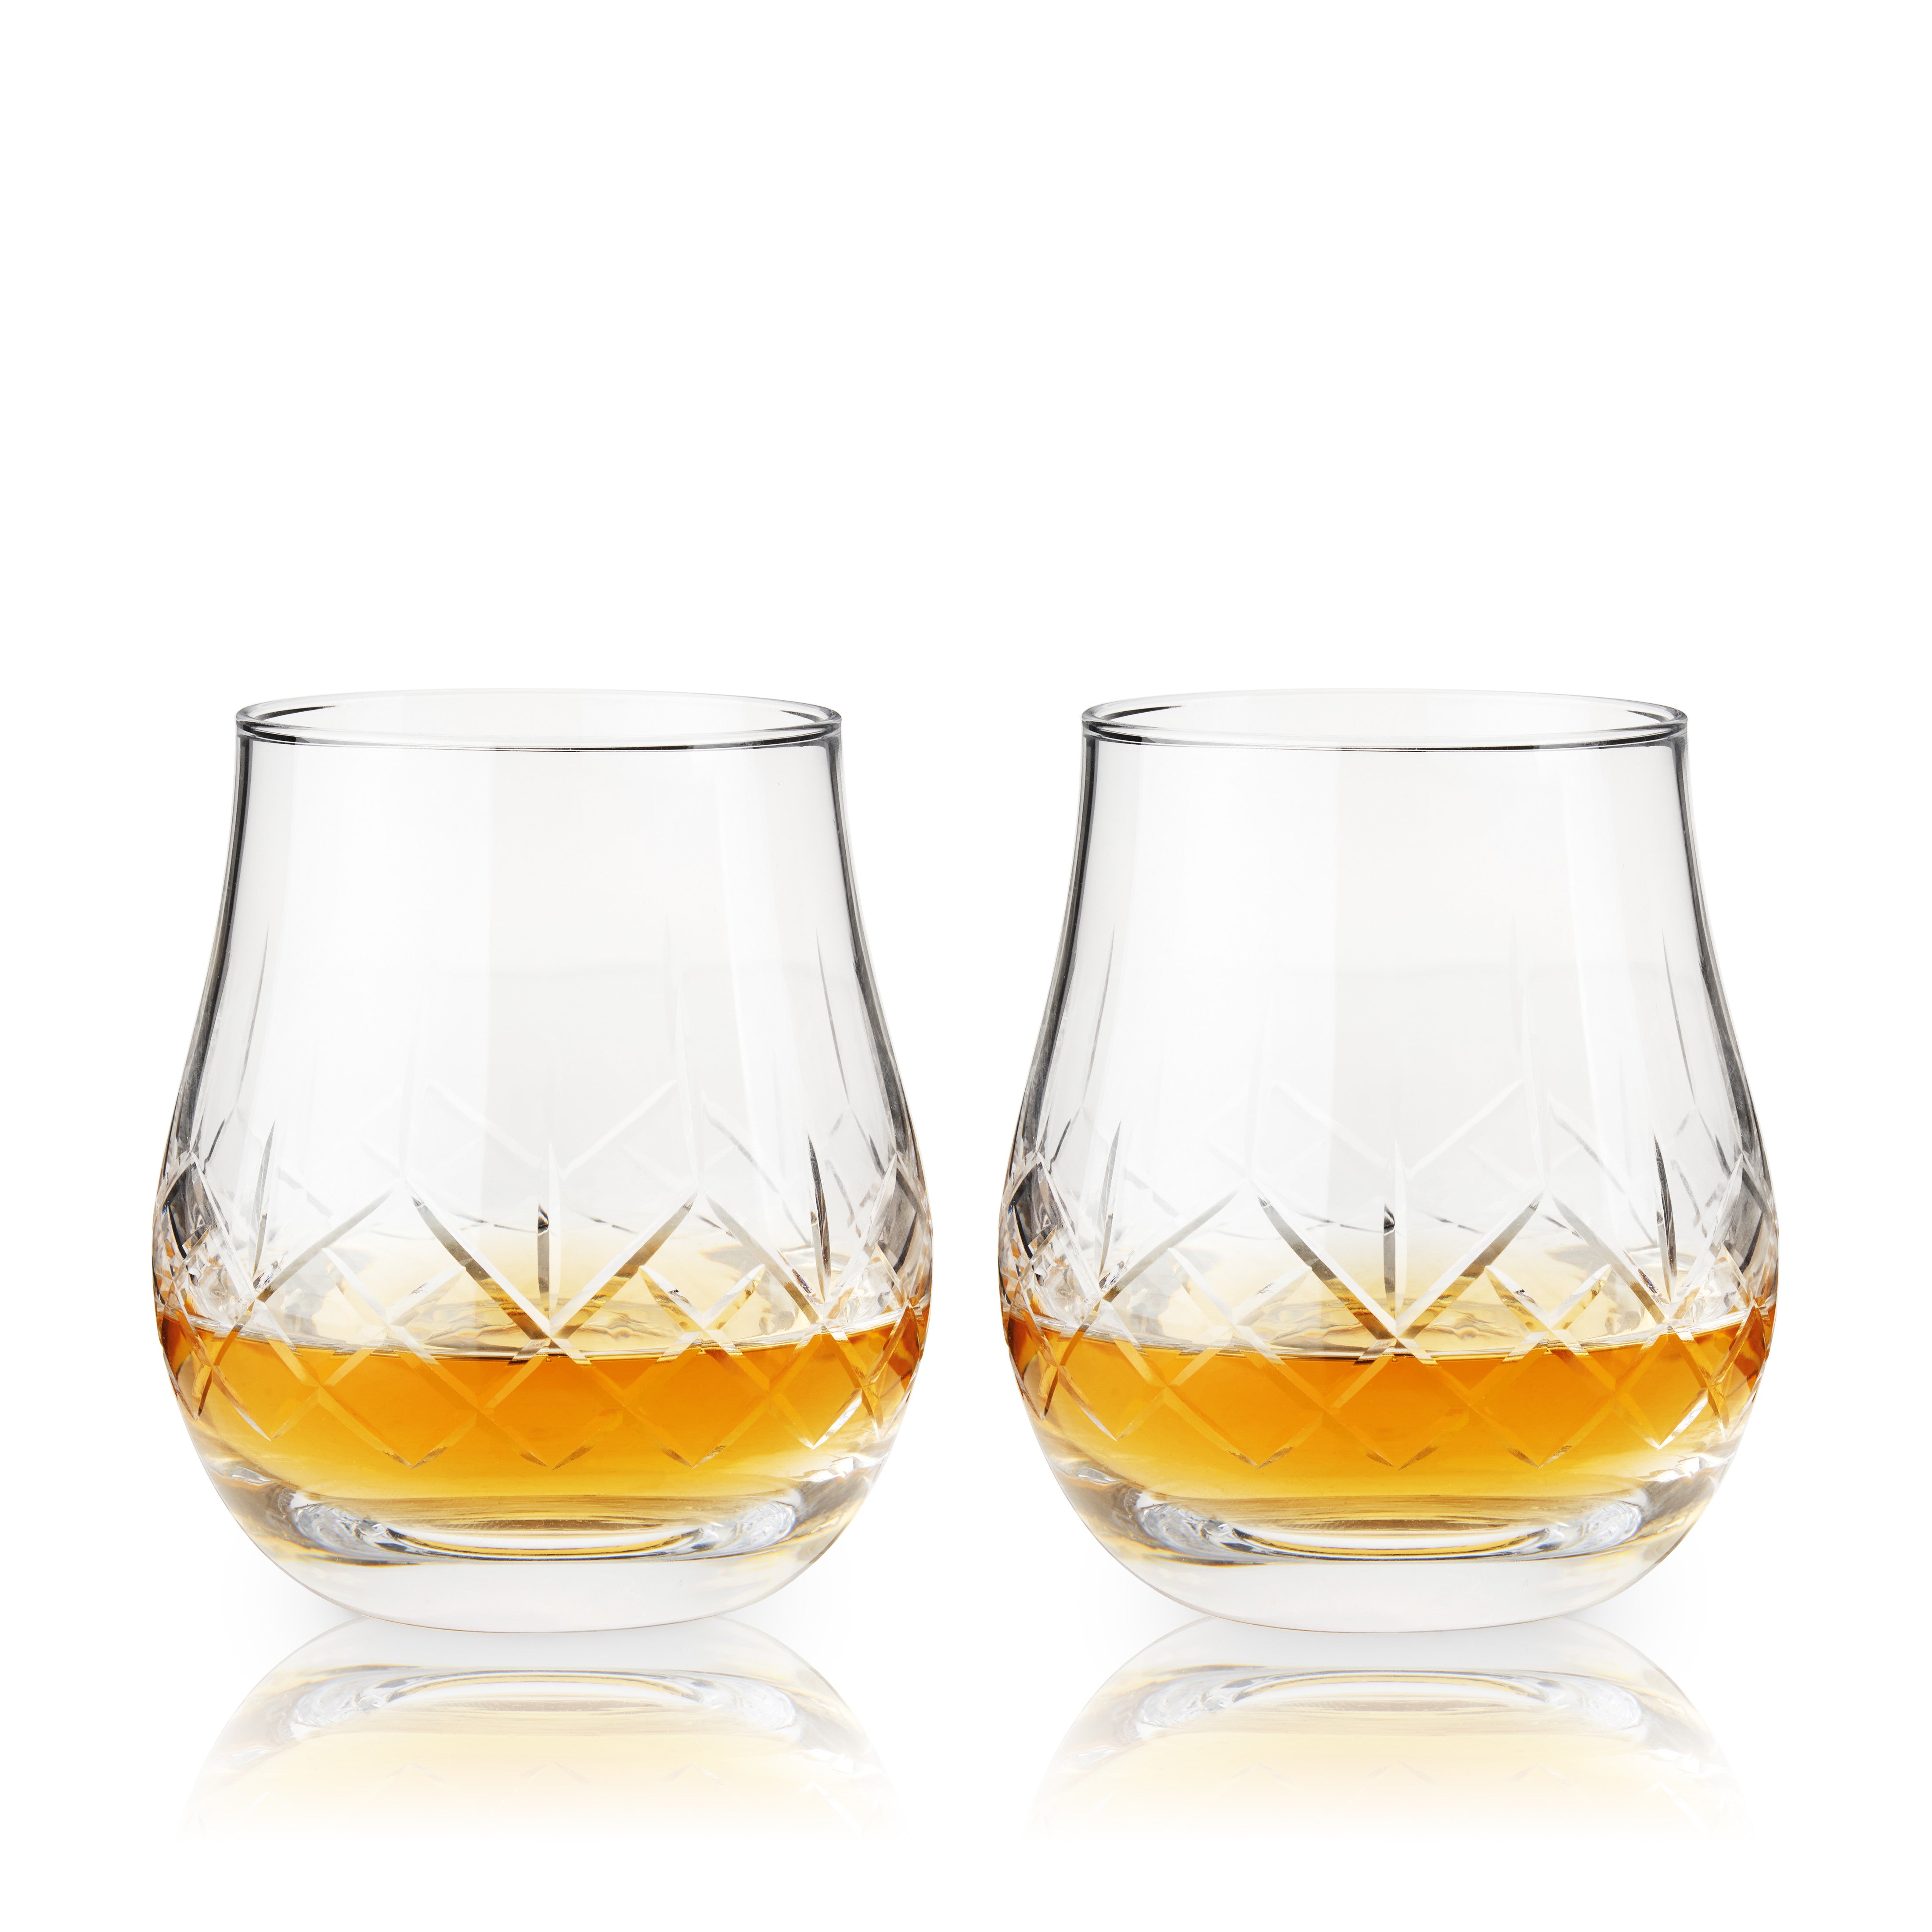 11 Best Whisky Glasses: Guide To The Perfect Scotch & Bourbon Glass